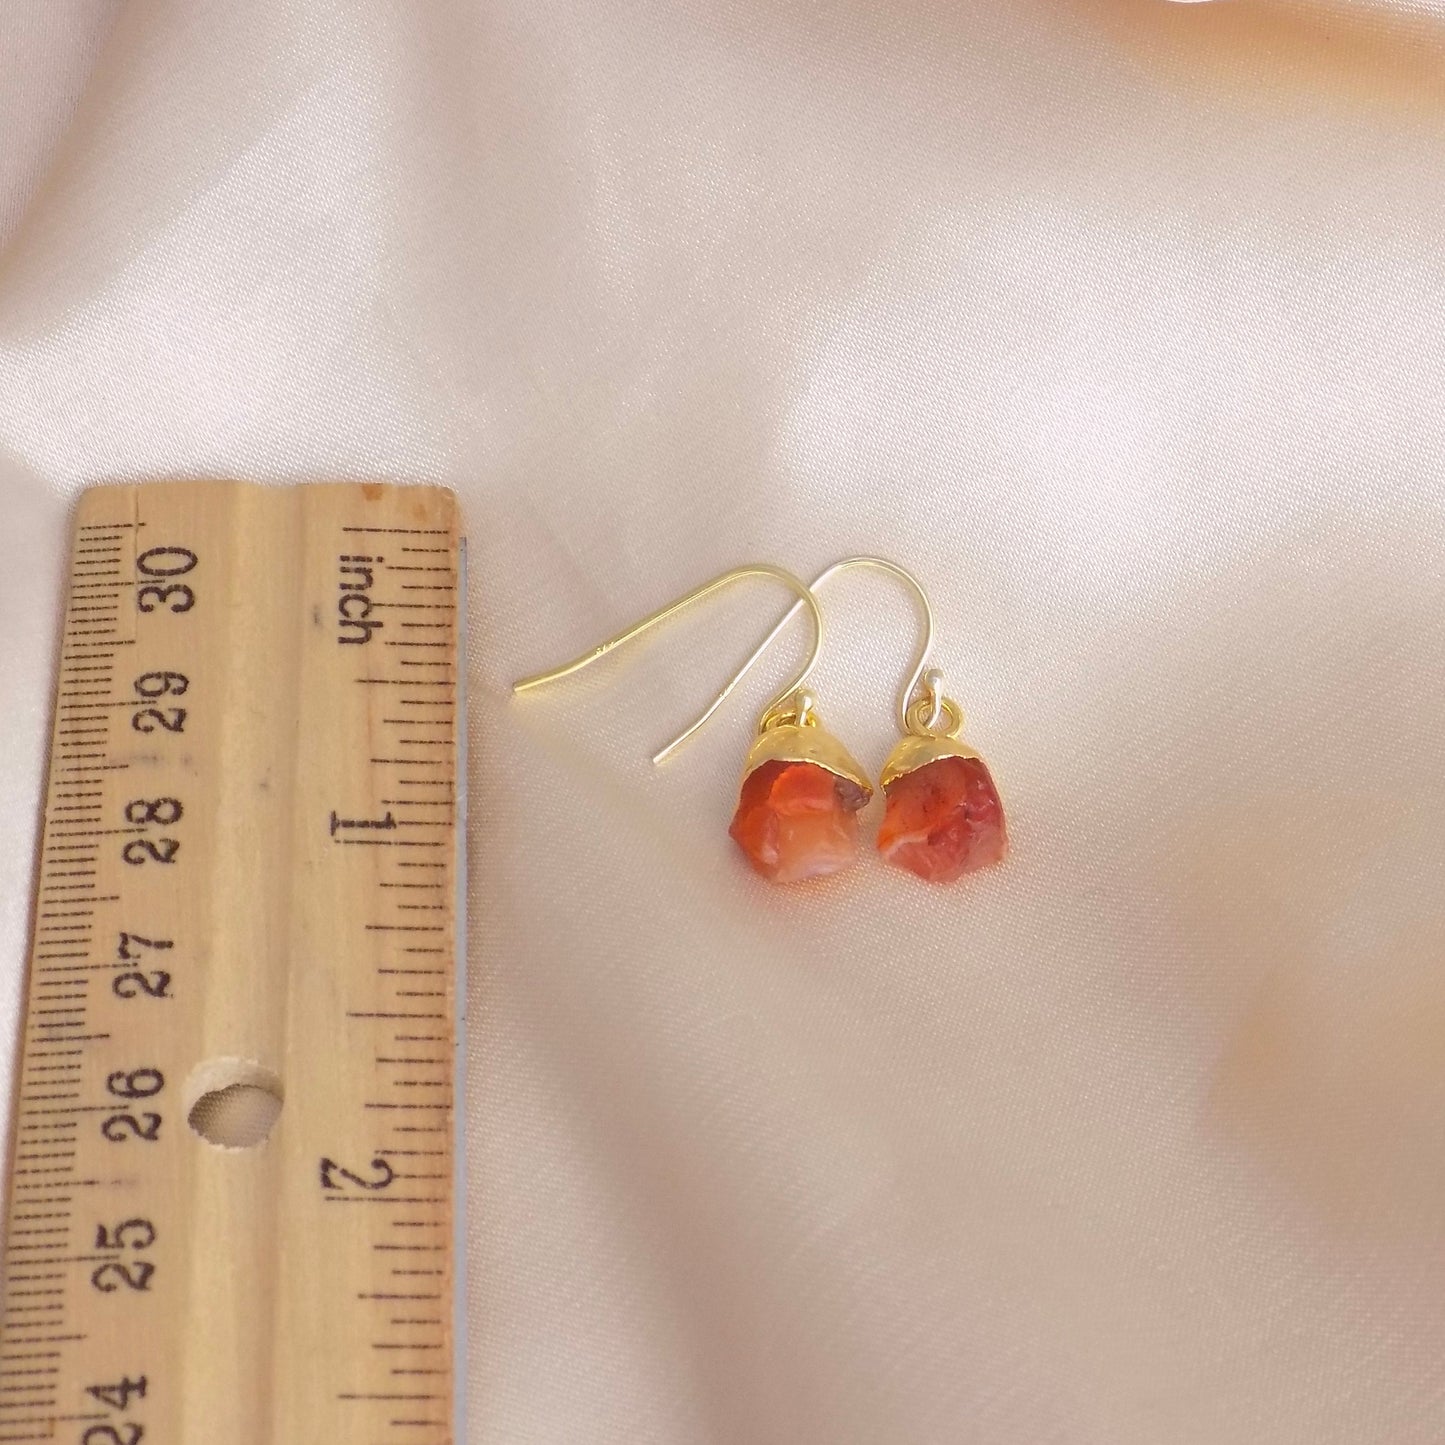 Valentines Day Gift, Raw Carnelian Earrings Gold, Rough Stone Orange Brown Earring, Gifts For Wife, G14-776